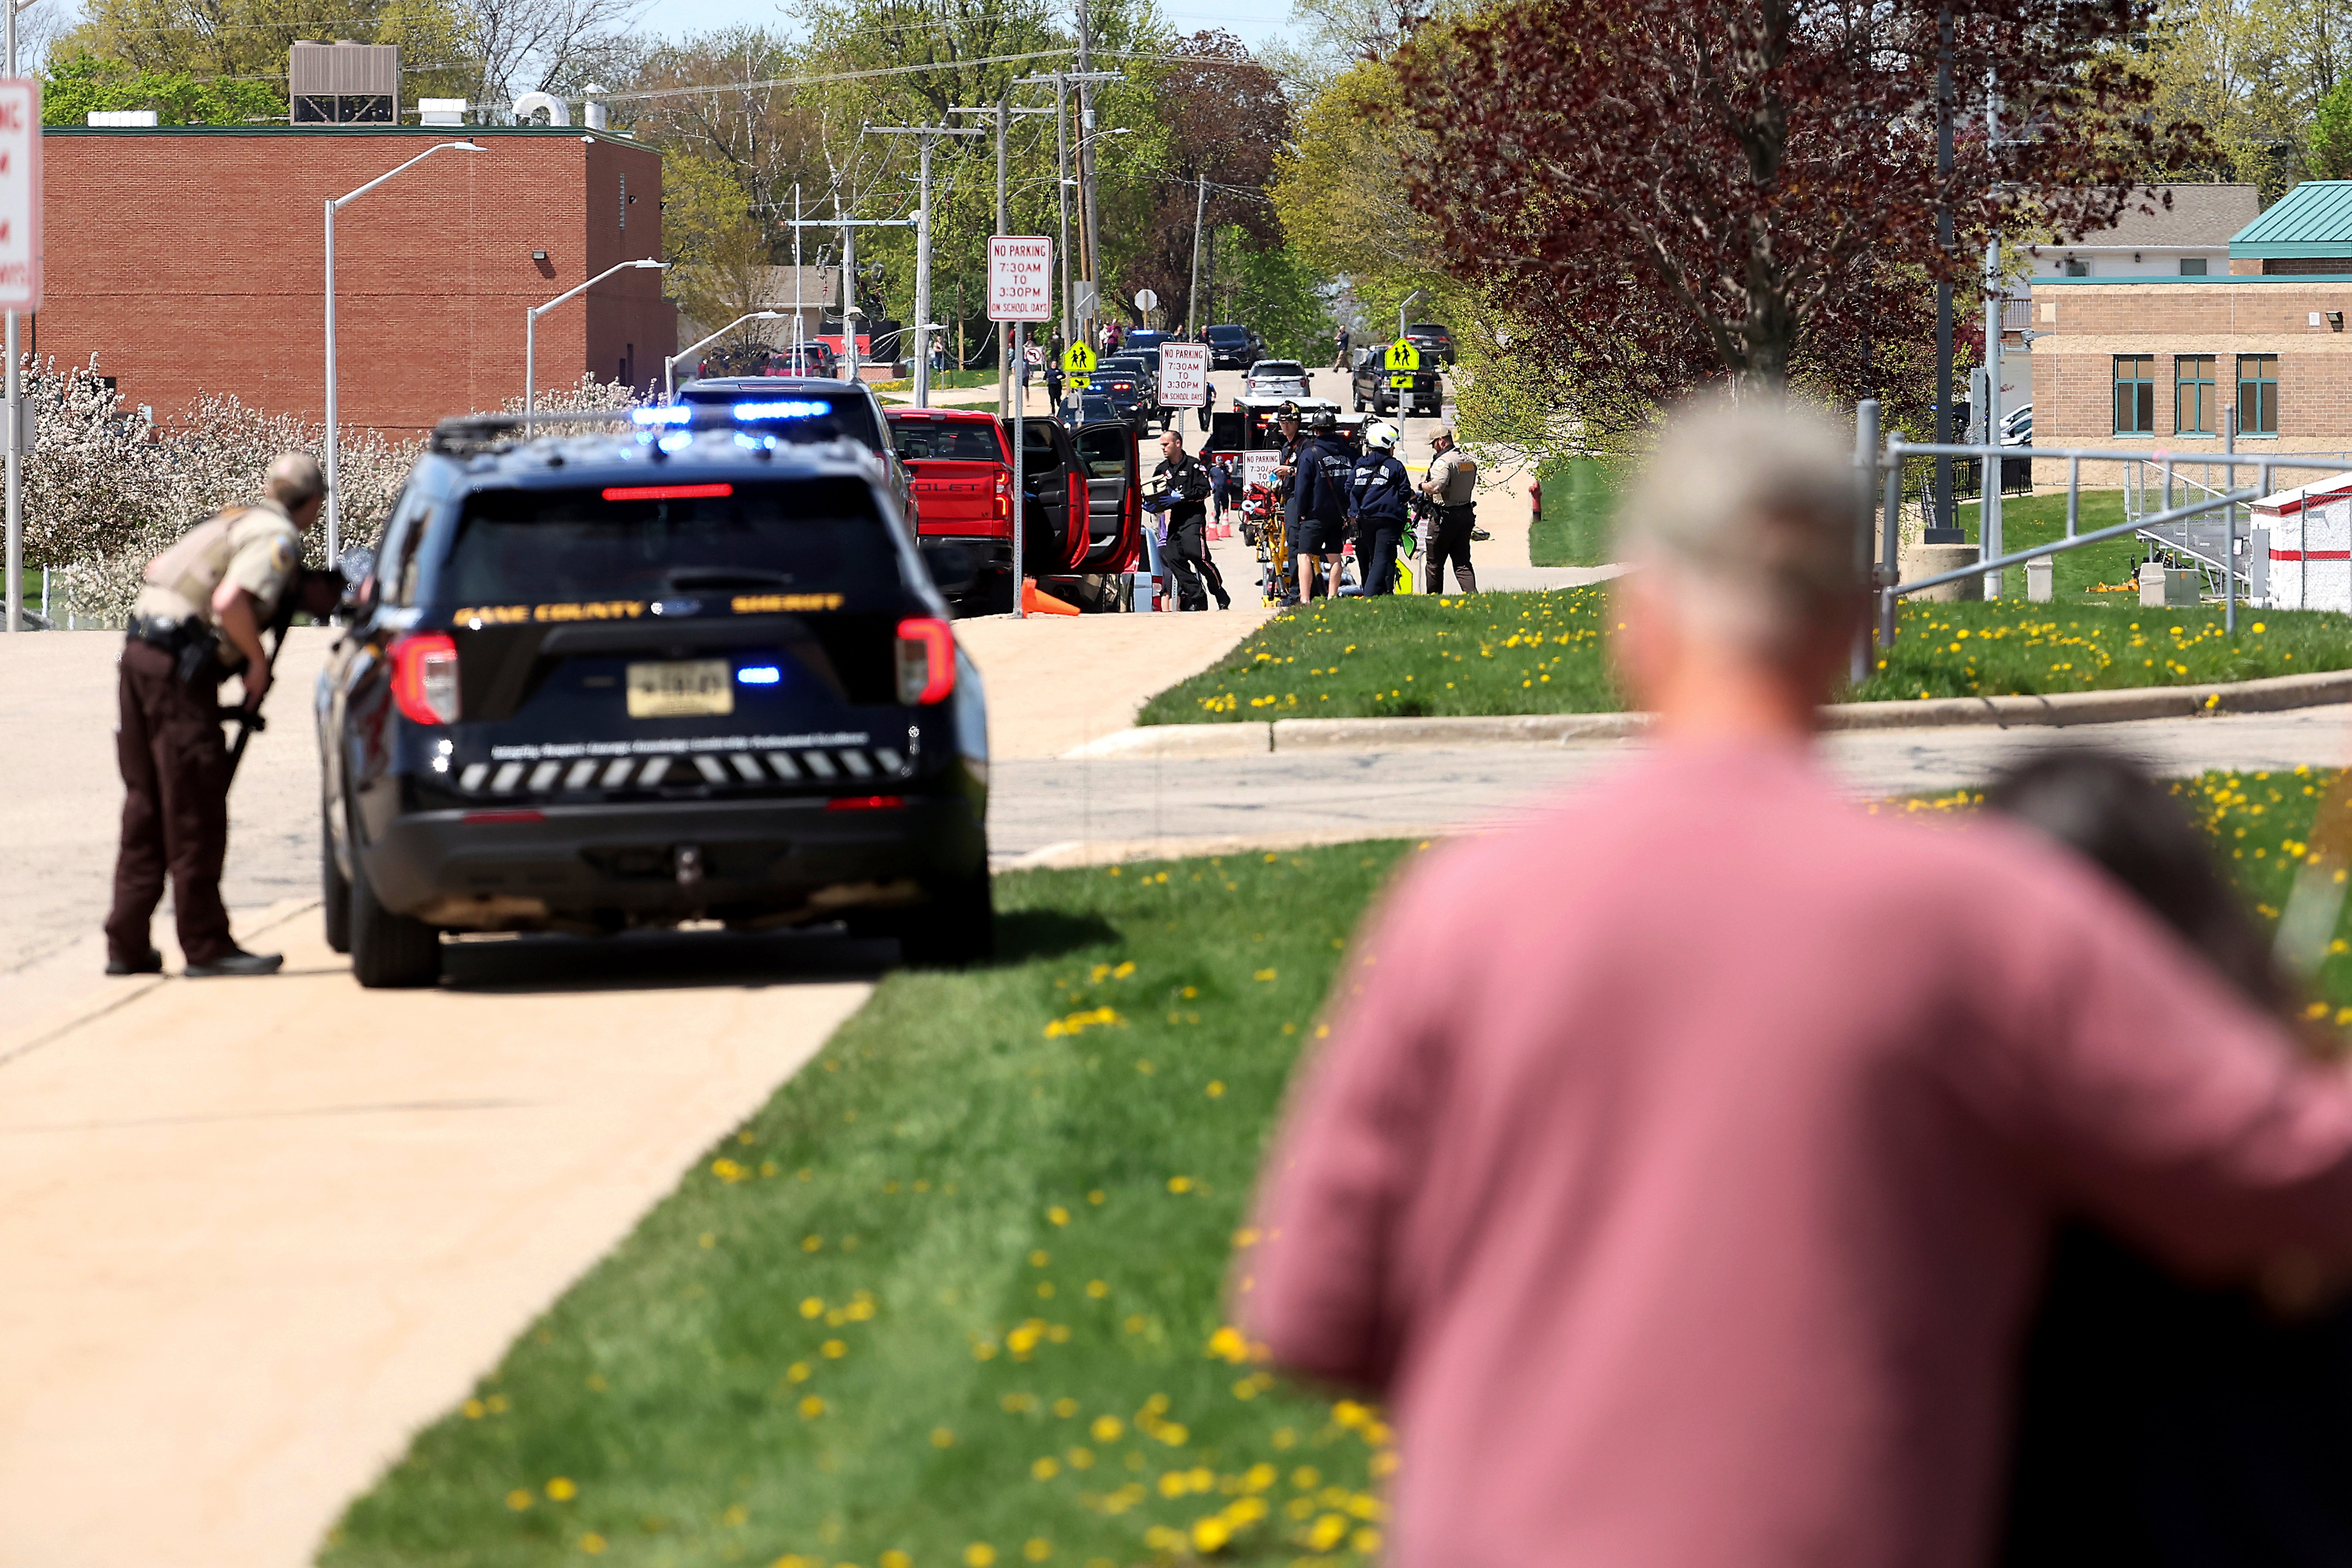 A 14-year-old Wisconsin middle school student was shot and killed by police after the teen was seen approaching the school with a gun